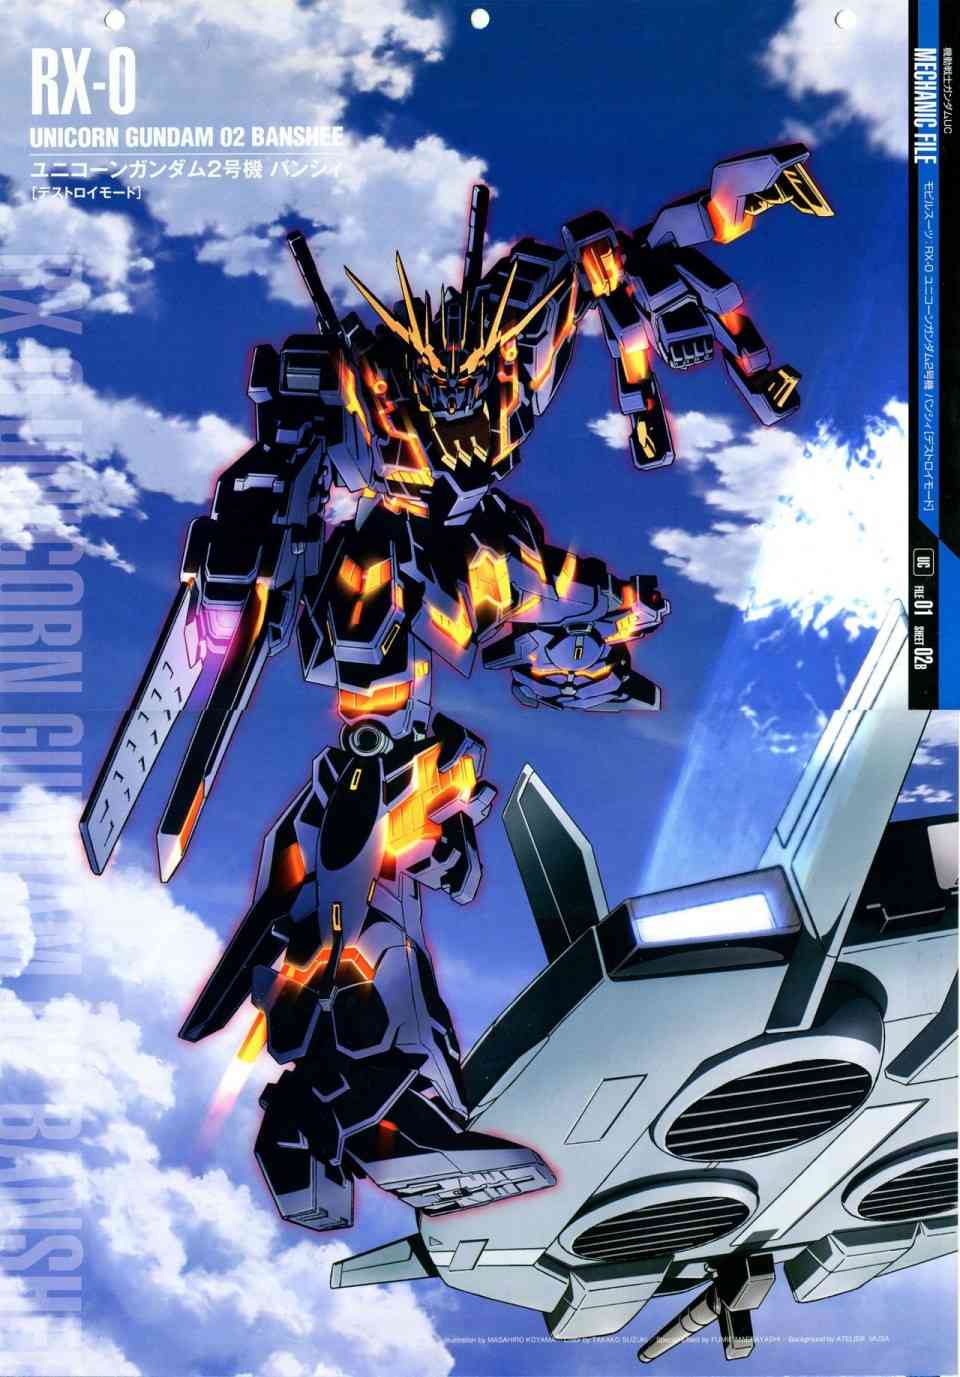 The Official Gundam Perfect File  - 第56-64話(1/7) - 3